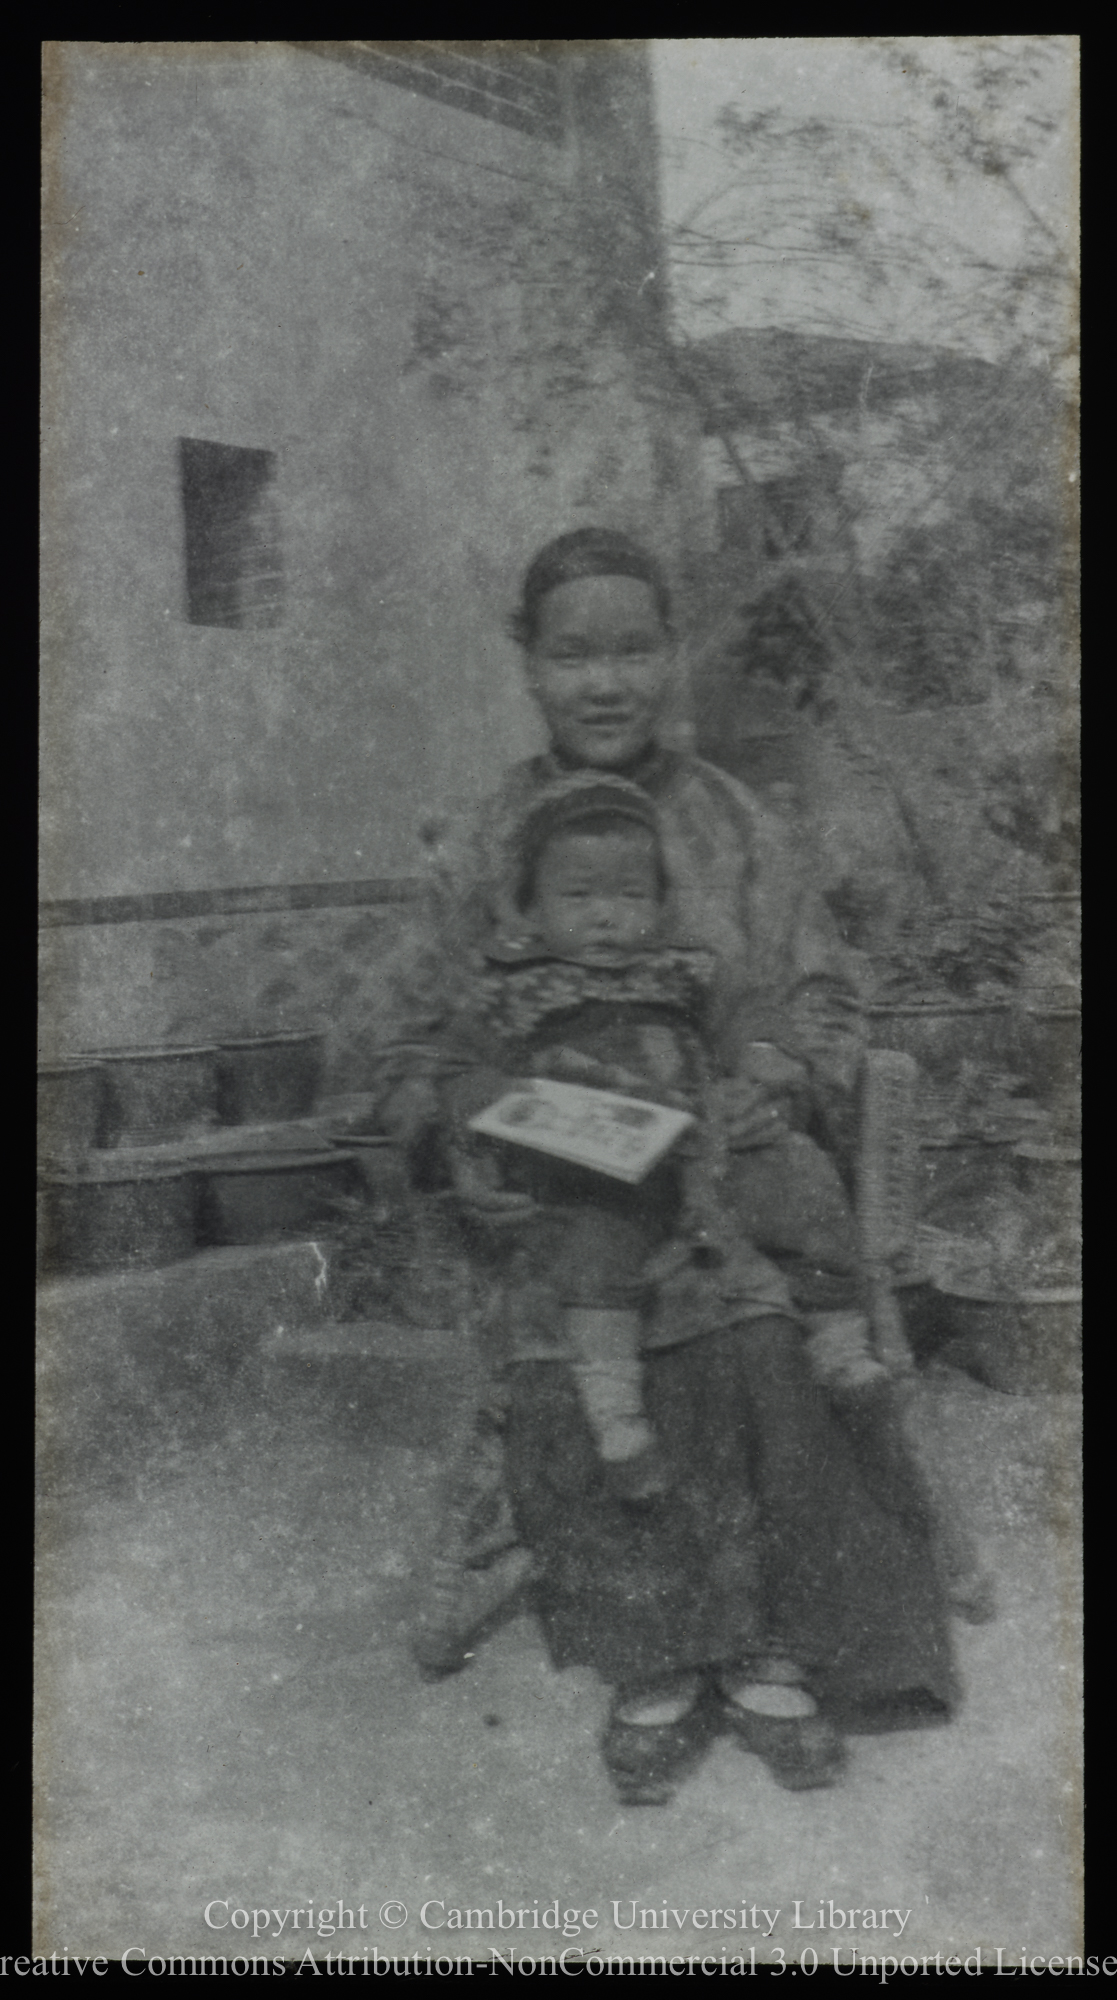 Chinese woman with child on lap, 1900 - 1920